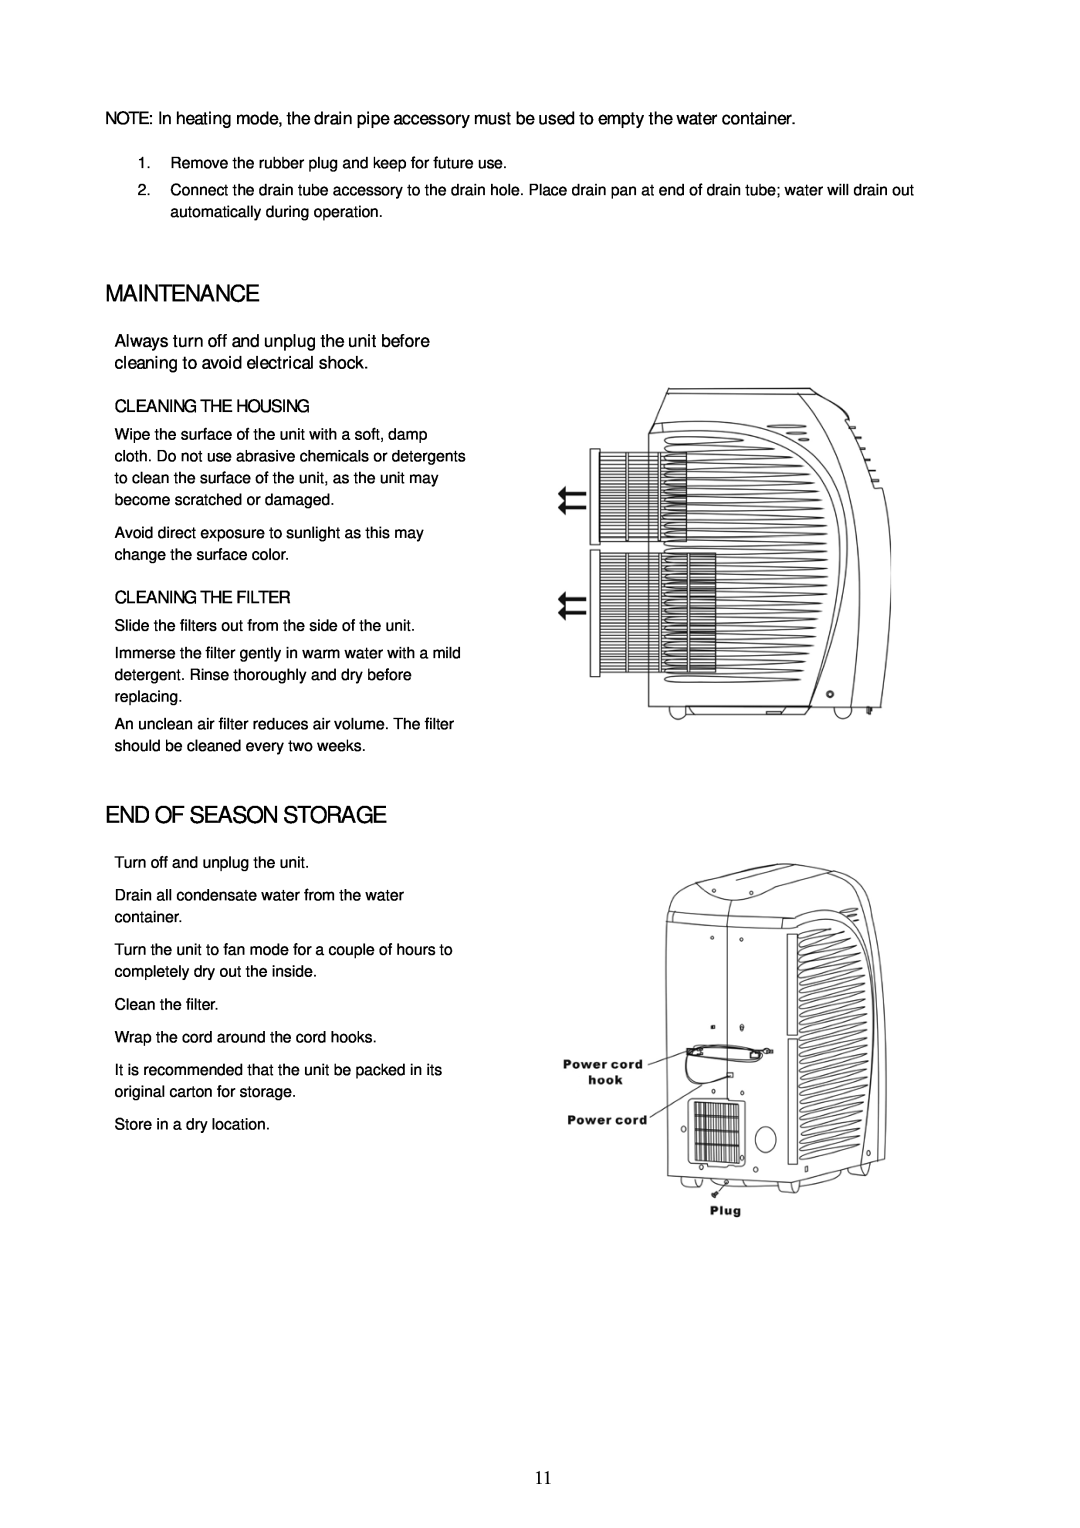 Soleus Air 000 BTU Evaporative Portable Air Conditioner and 14 Maintenance, End Of Season Storage, Cleaning The Housing 